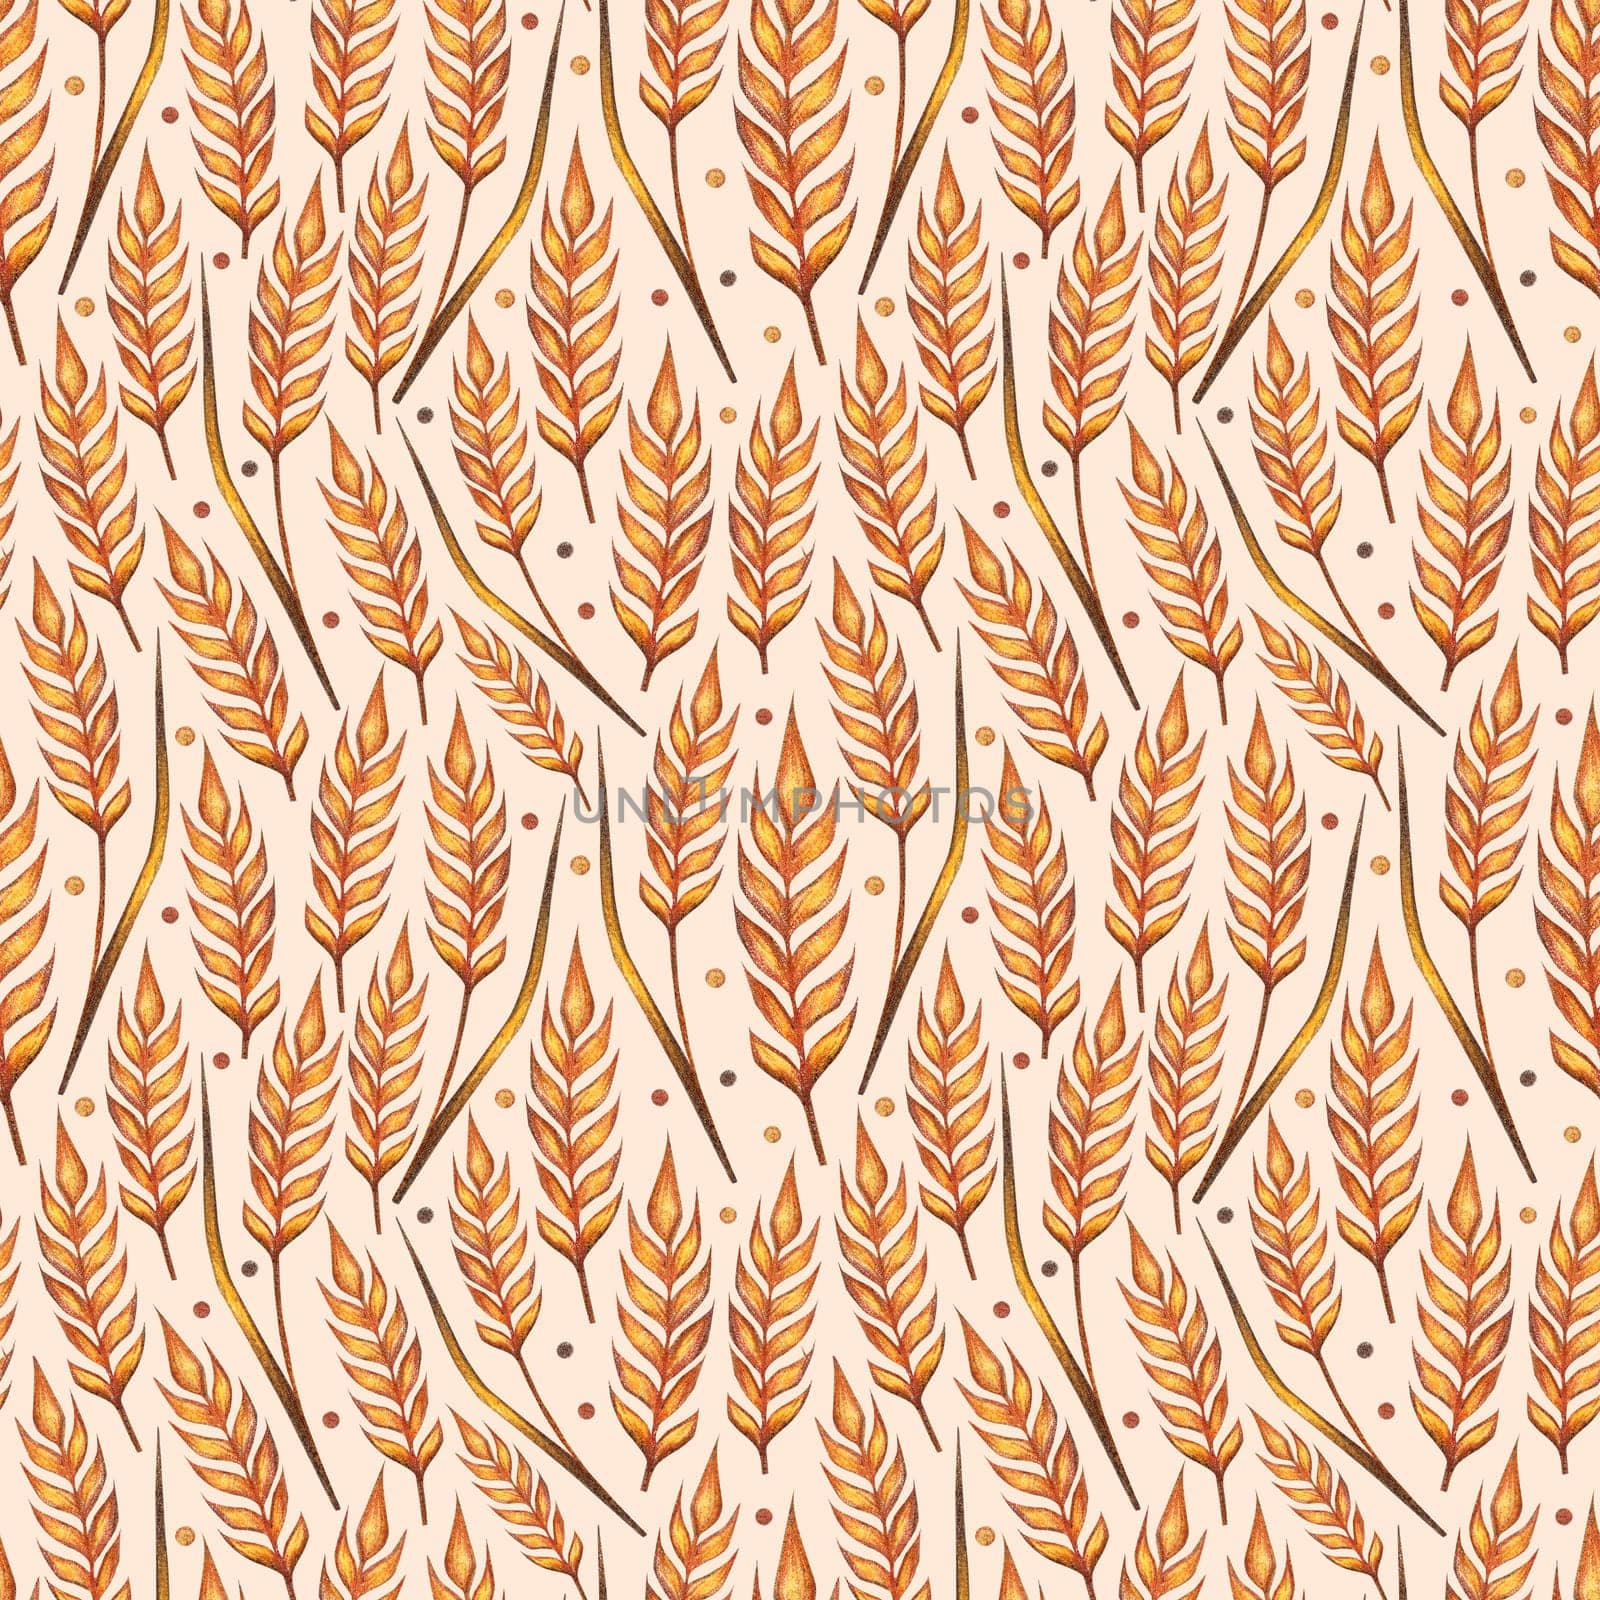 Ear of wheat watercolor seamless Hand drawn sketched illustration. Concept for agriculture, organic products, harvesting grain, bakery, healthy food. by Anny_Sketches